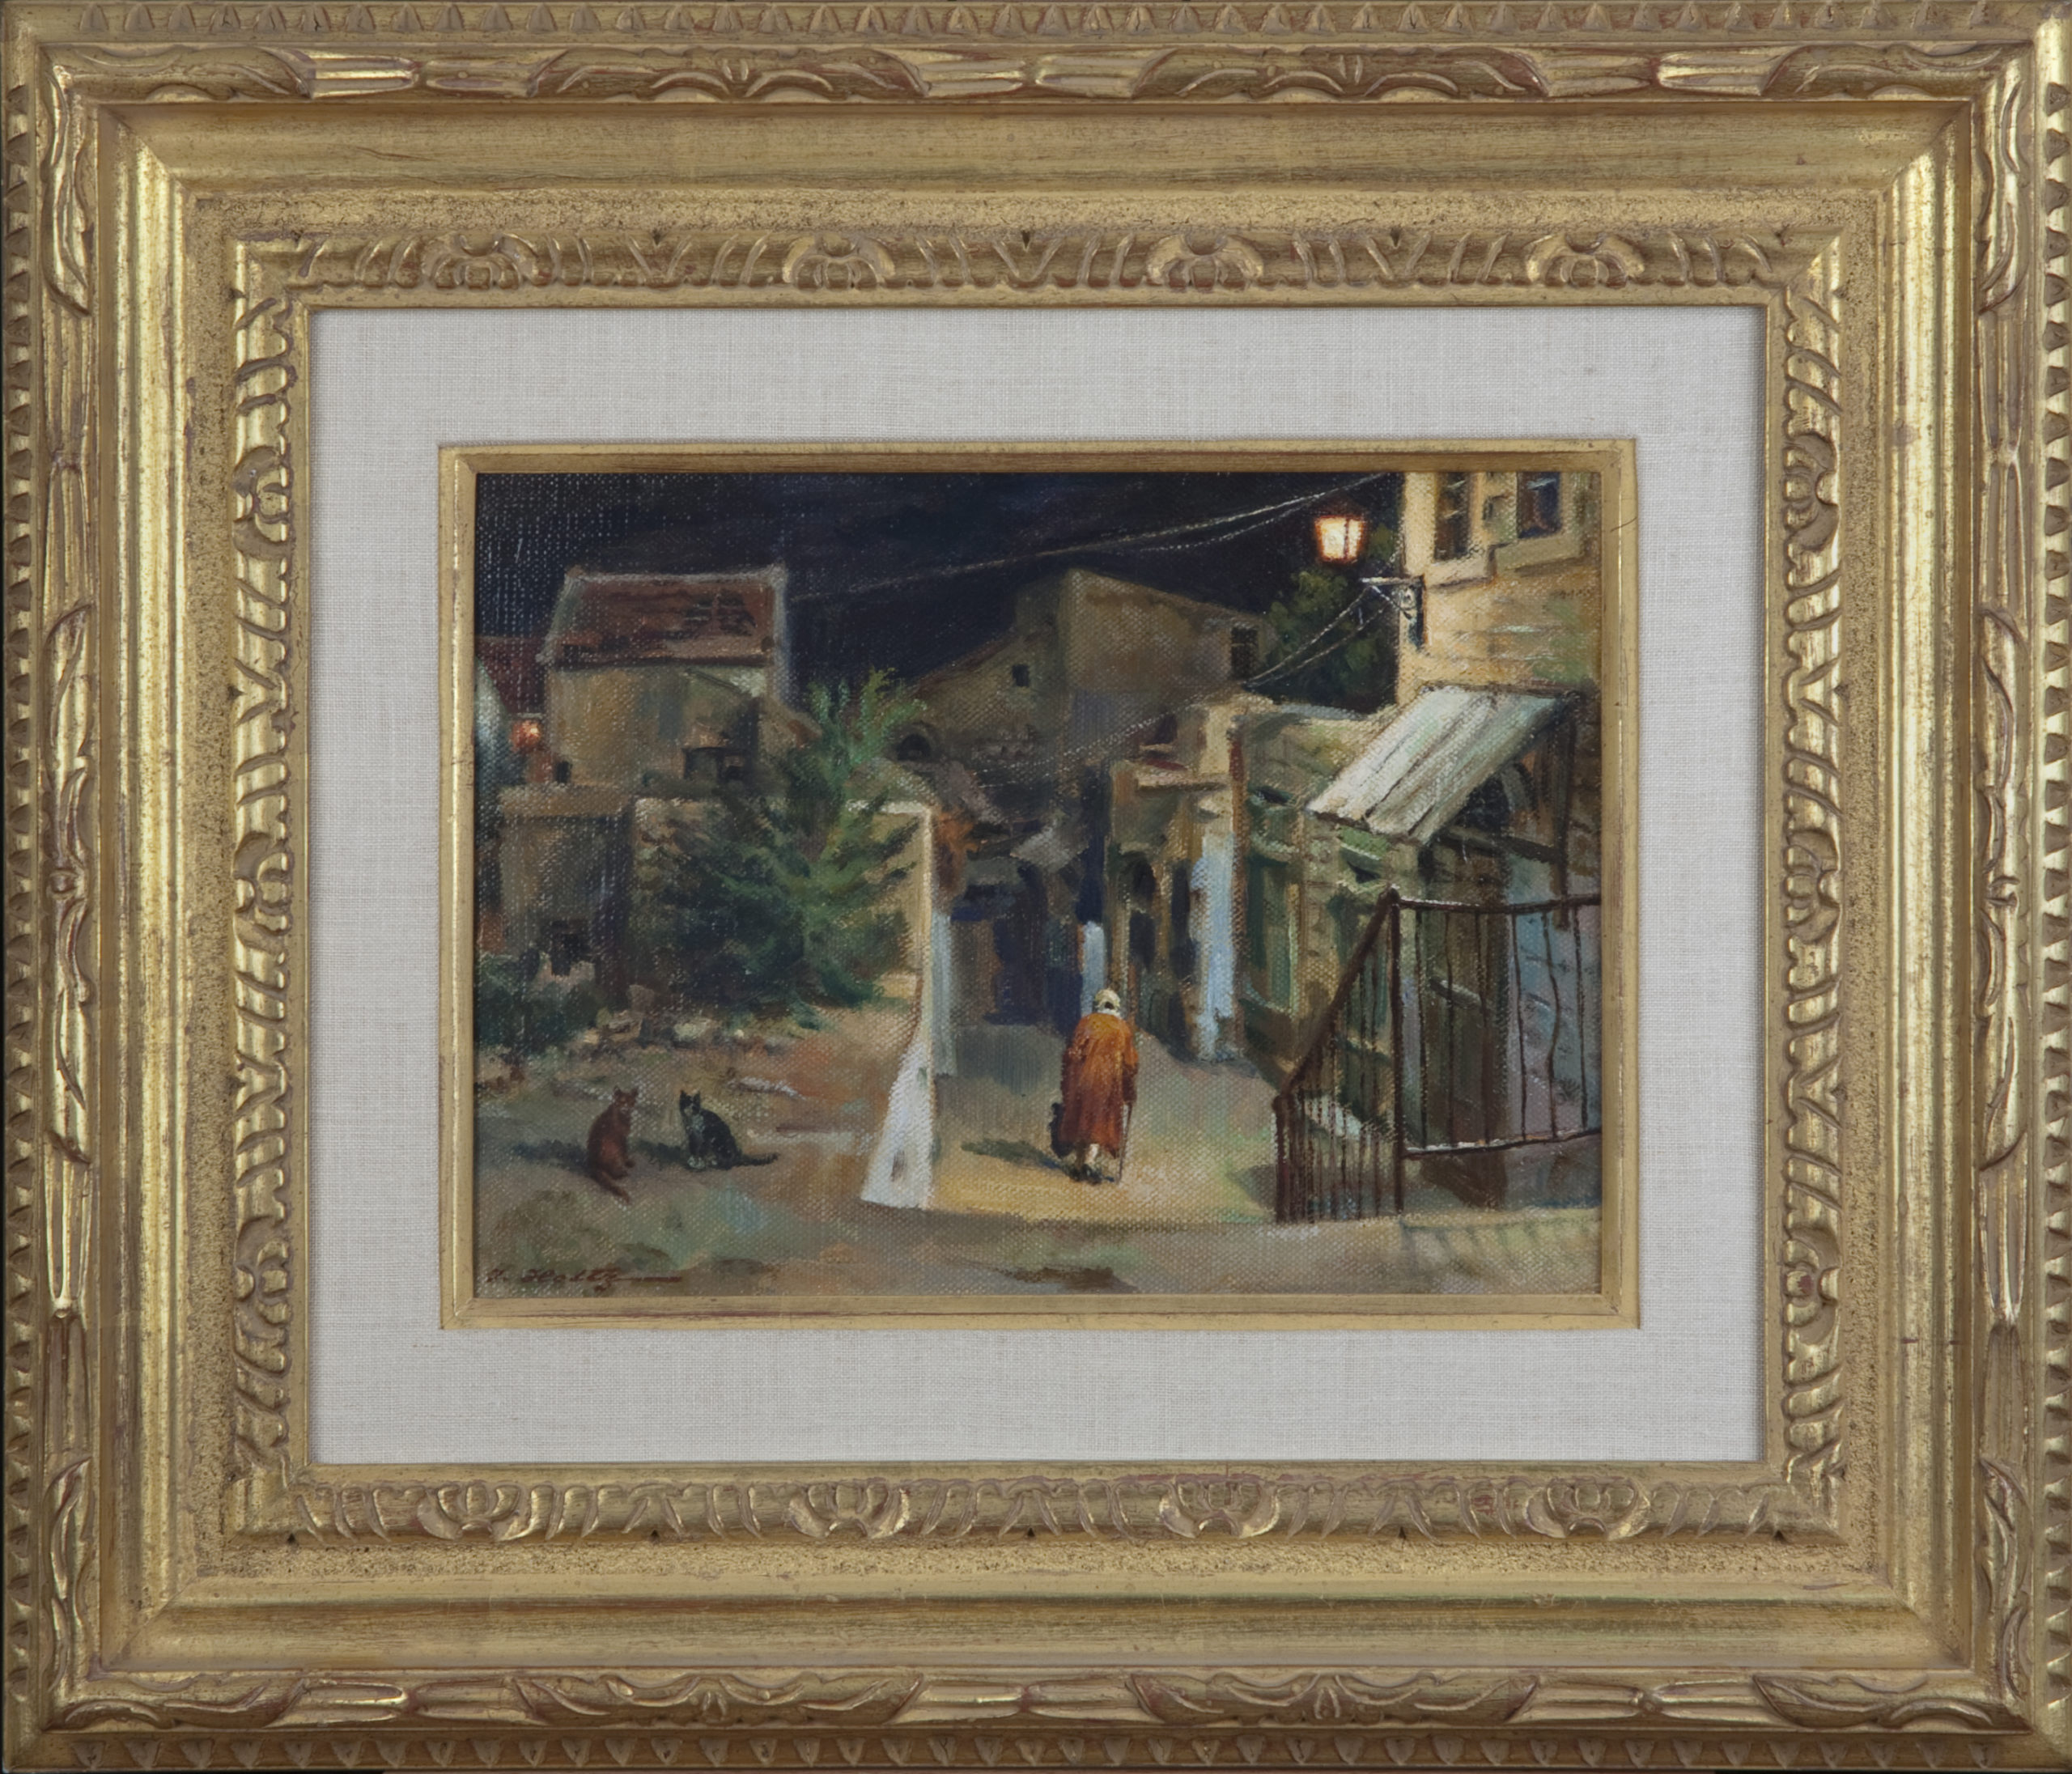 044 Night in Safed 1977 - Oil on Canvas - 12 x 9 - Frame: 21.5 x 18.5 x 2.5